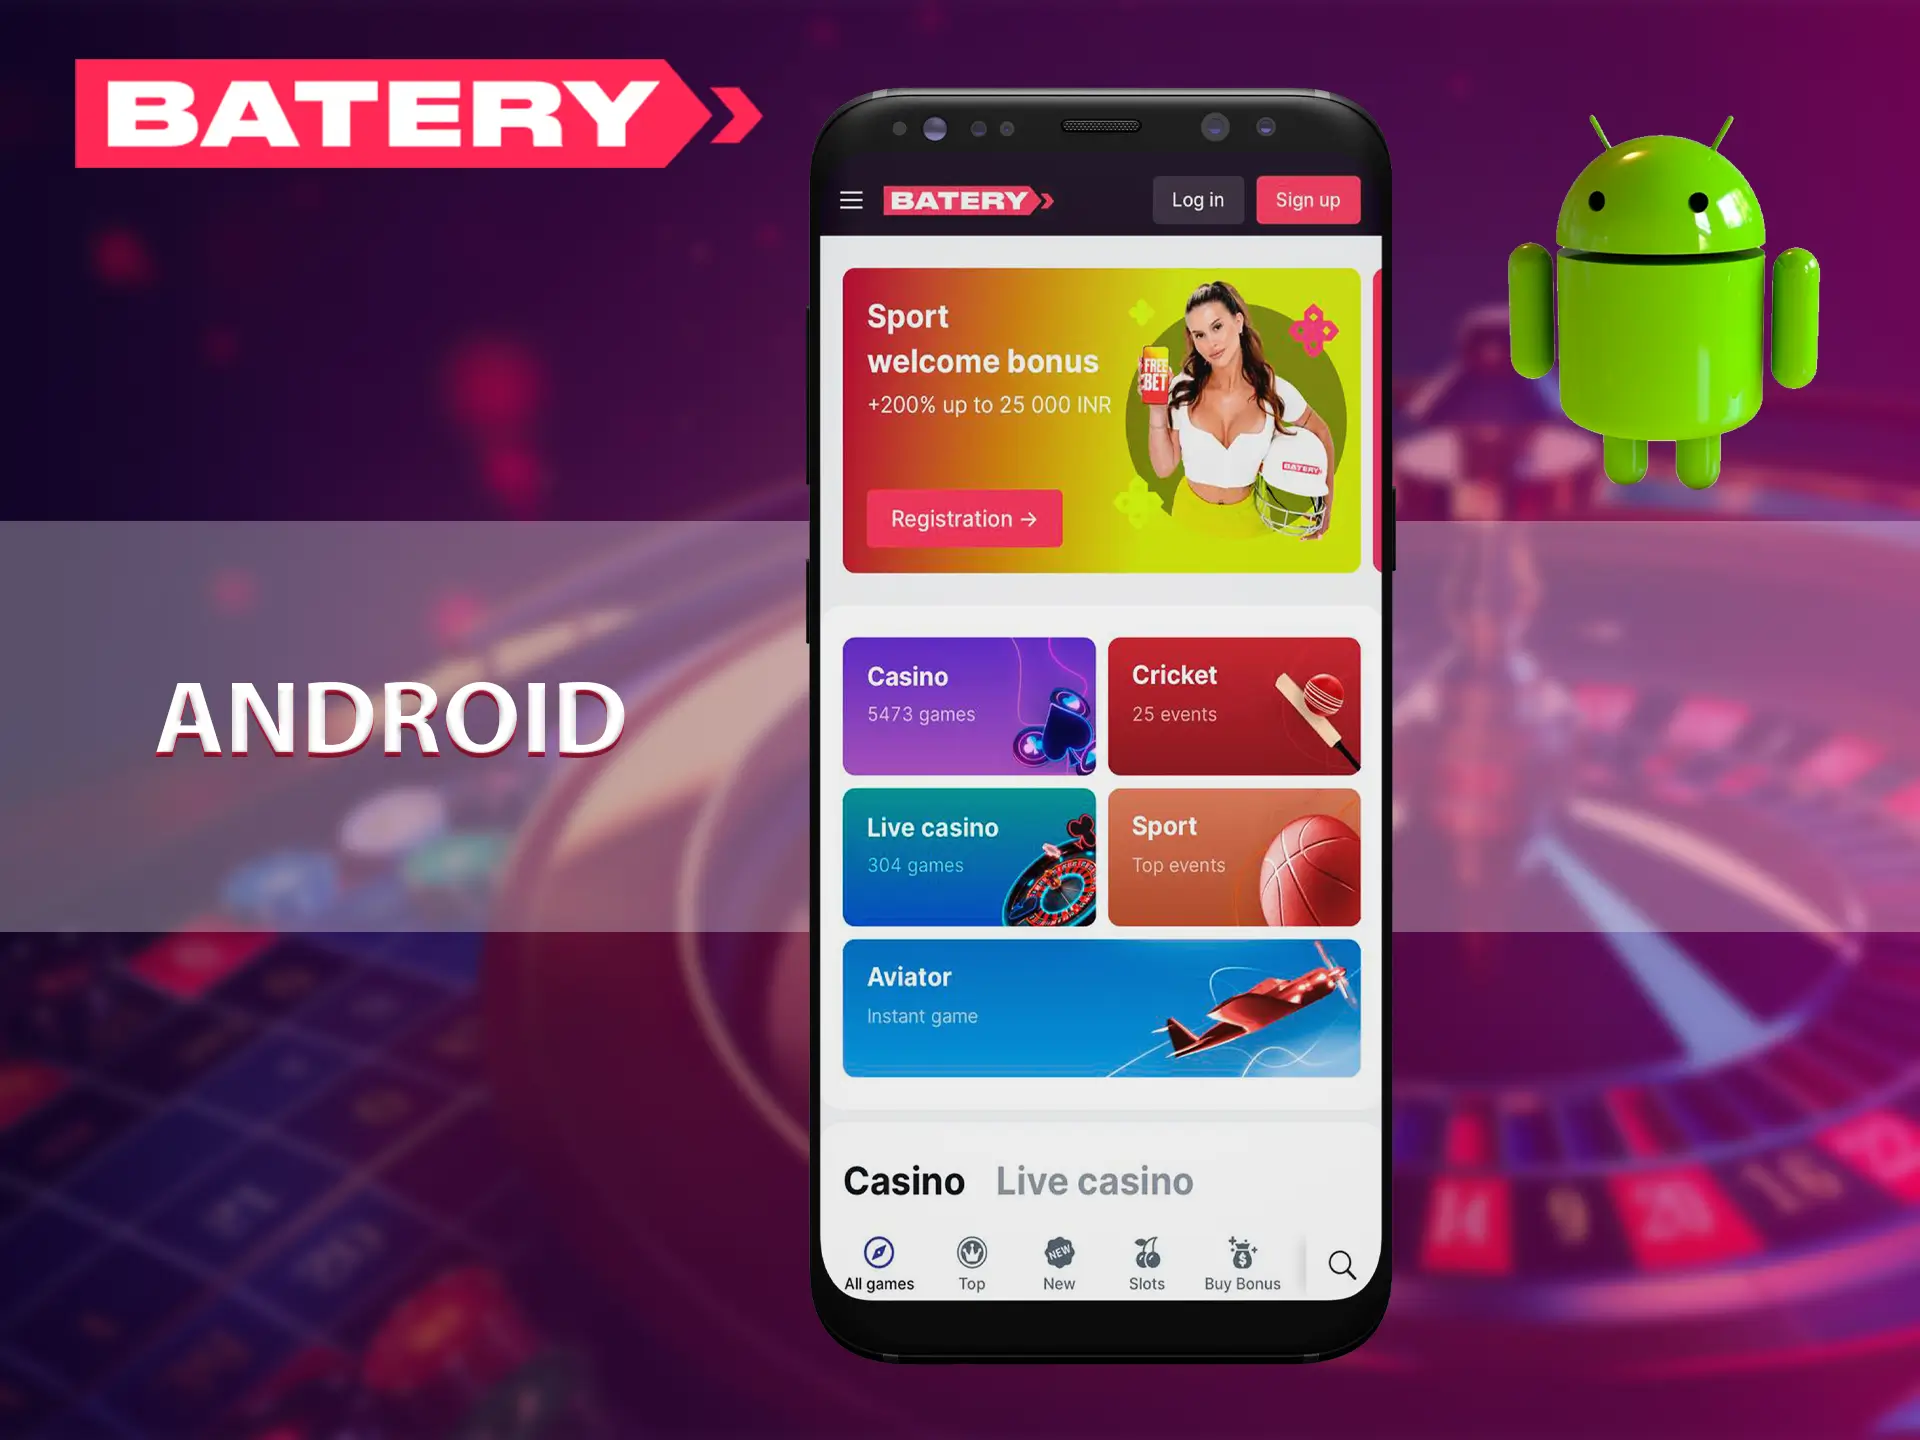 Enjoy the game in the Batery mobile app on Android devices.